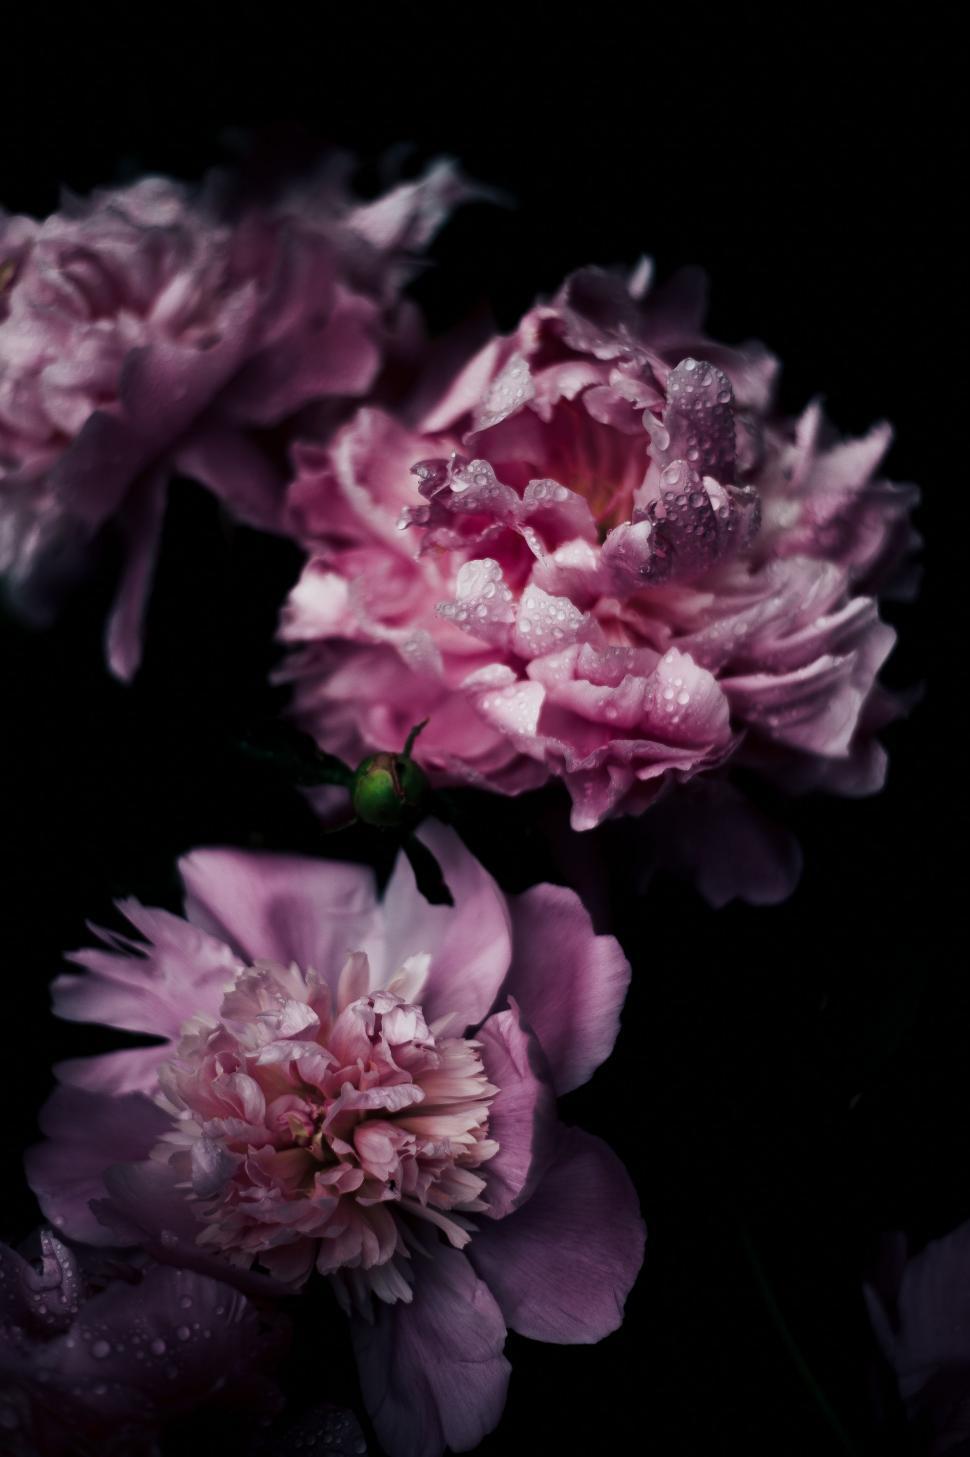 Free Image of Three Pink Flowers With Water Droplets 